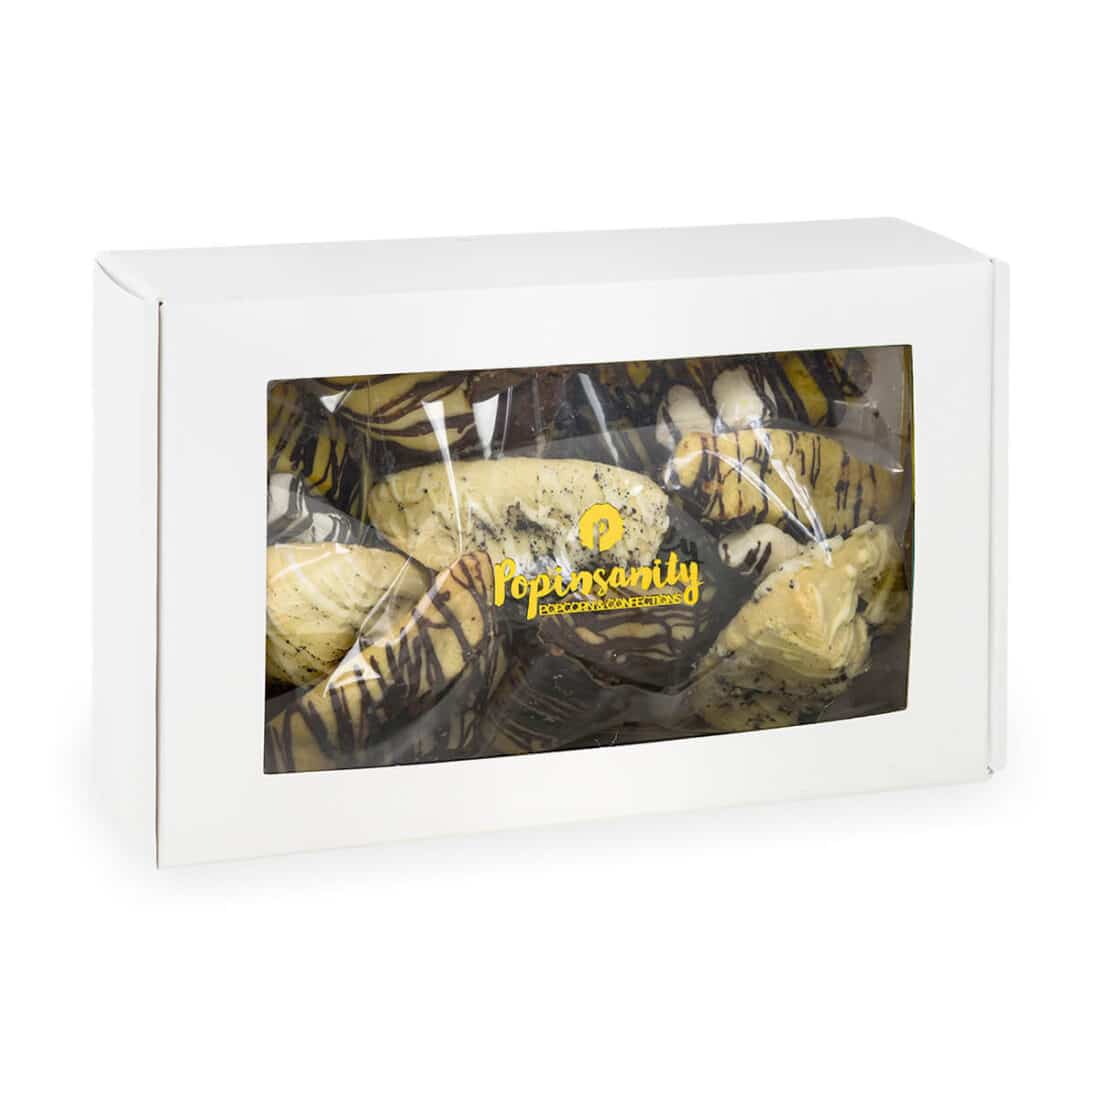 Gift the Taste of Tradition: White Gift Box with Window Displays 9 Artisan Hamantaschen (Gourmet Flavors) - Celebrate Purim with Kosher Delights!